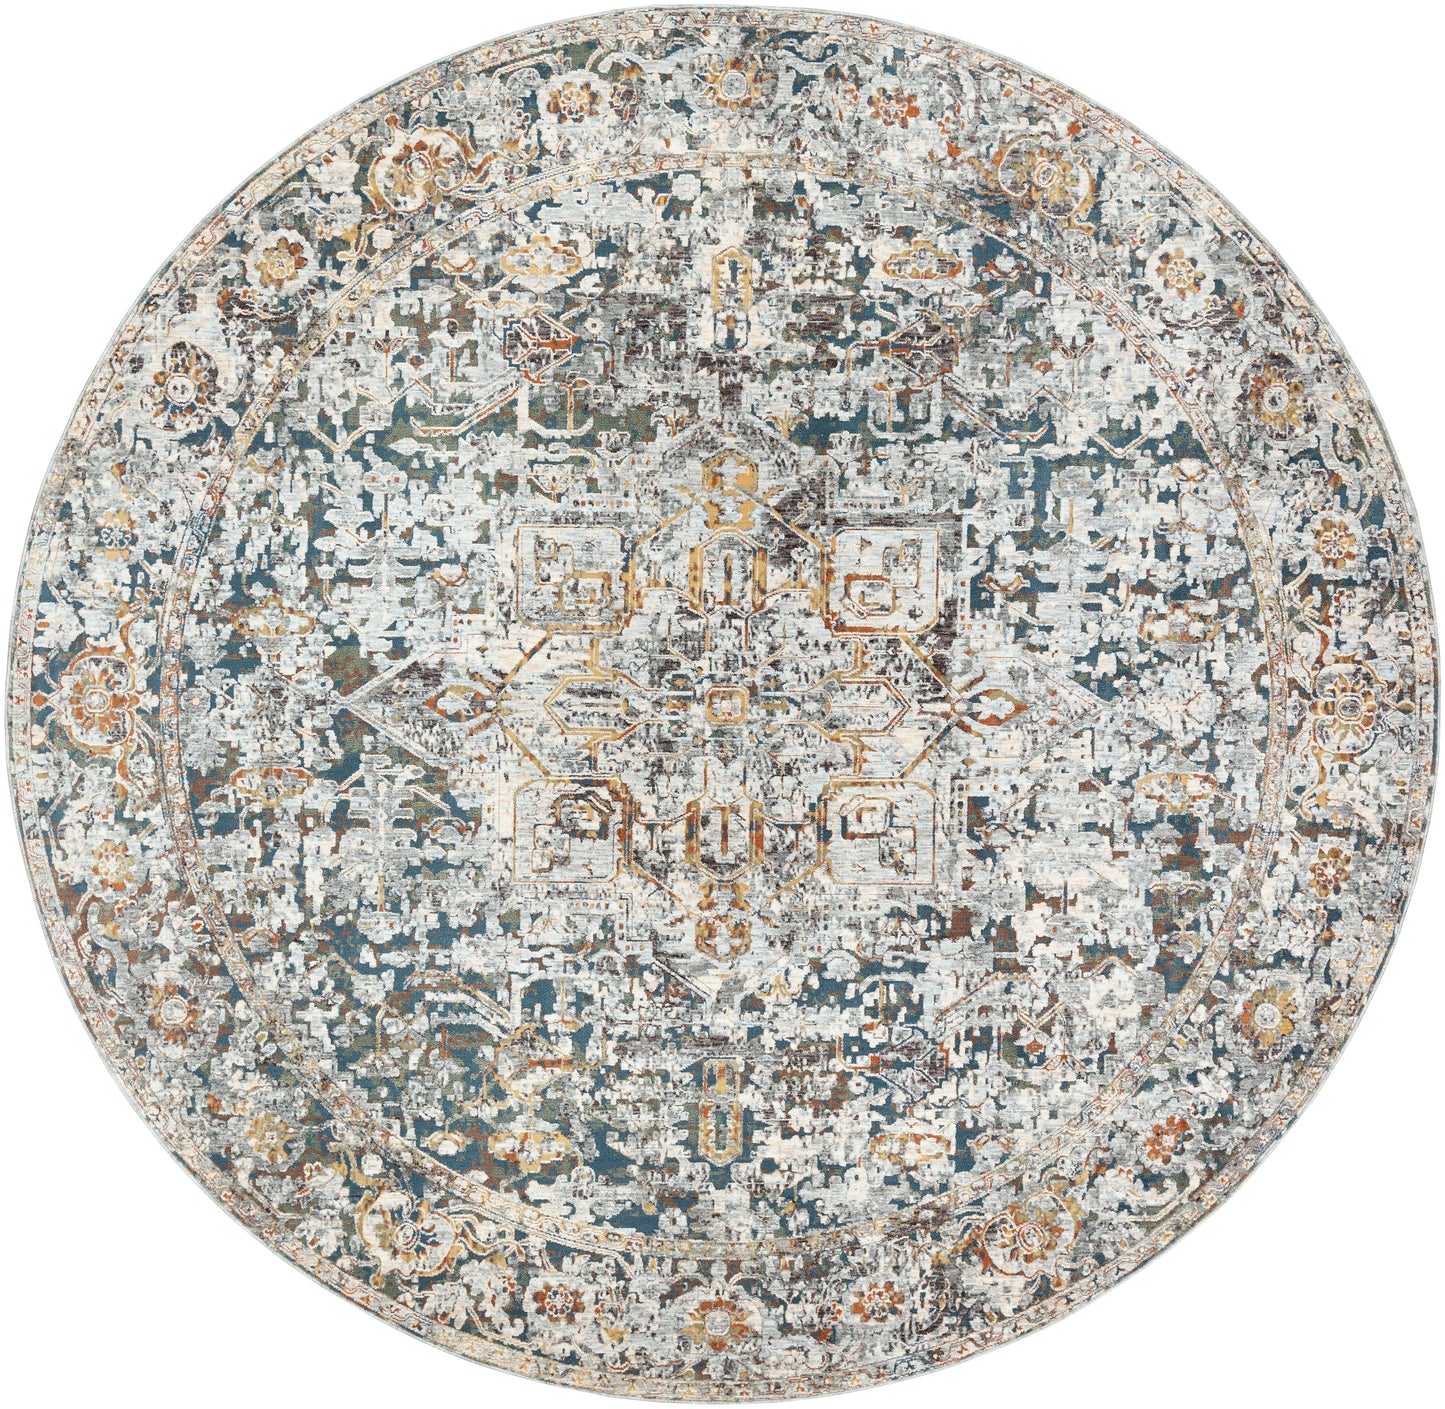 Presidential 22803 Machine Woven Synthetic Blend Indoor Area Rug by Surya Rugs